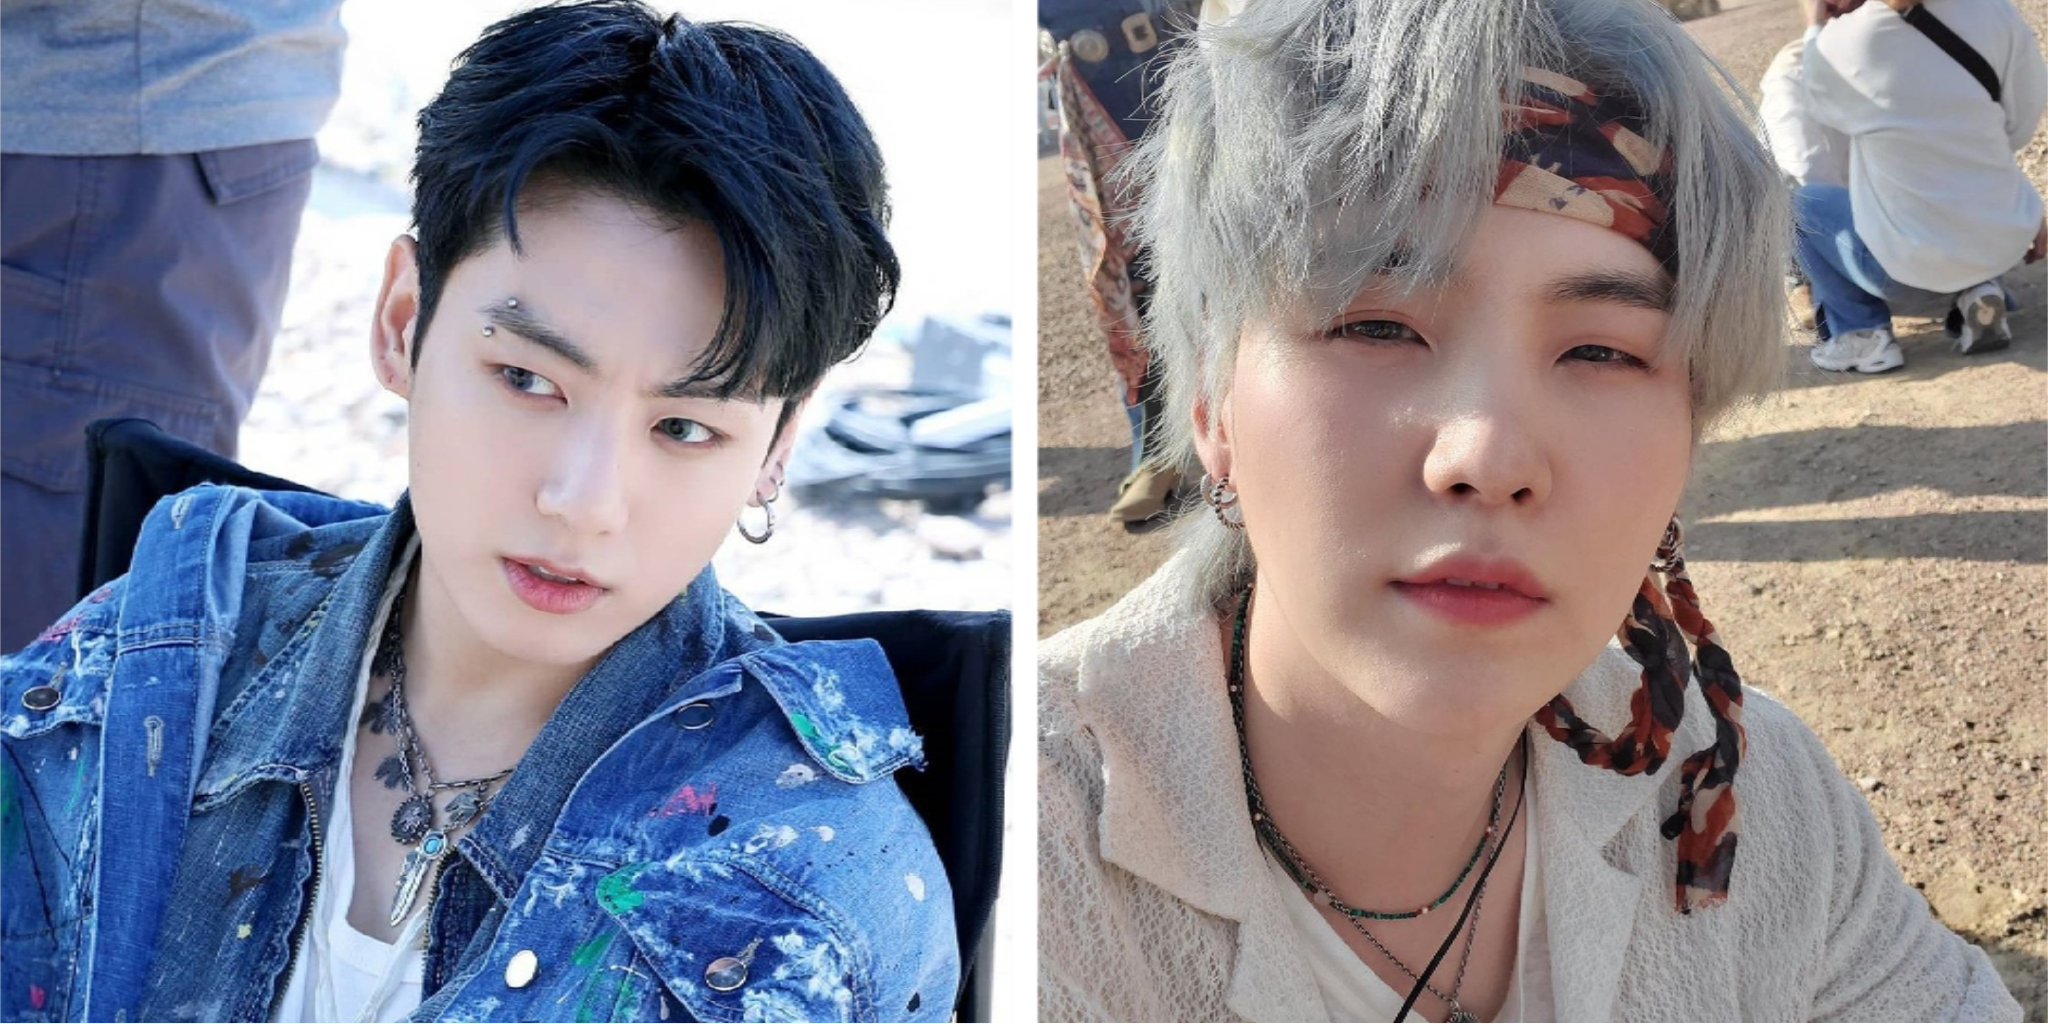 Jungkook and Suga stab the hearts of their fans with their fashion!